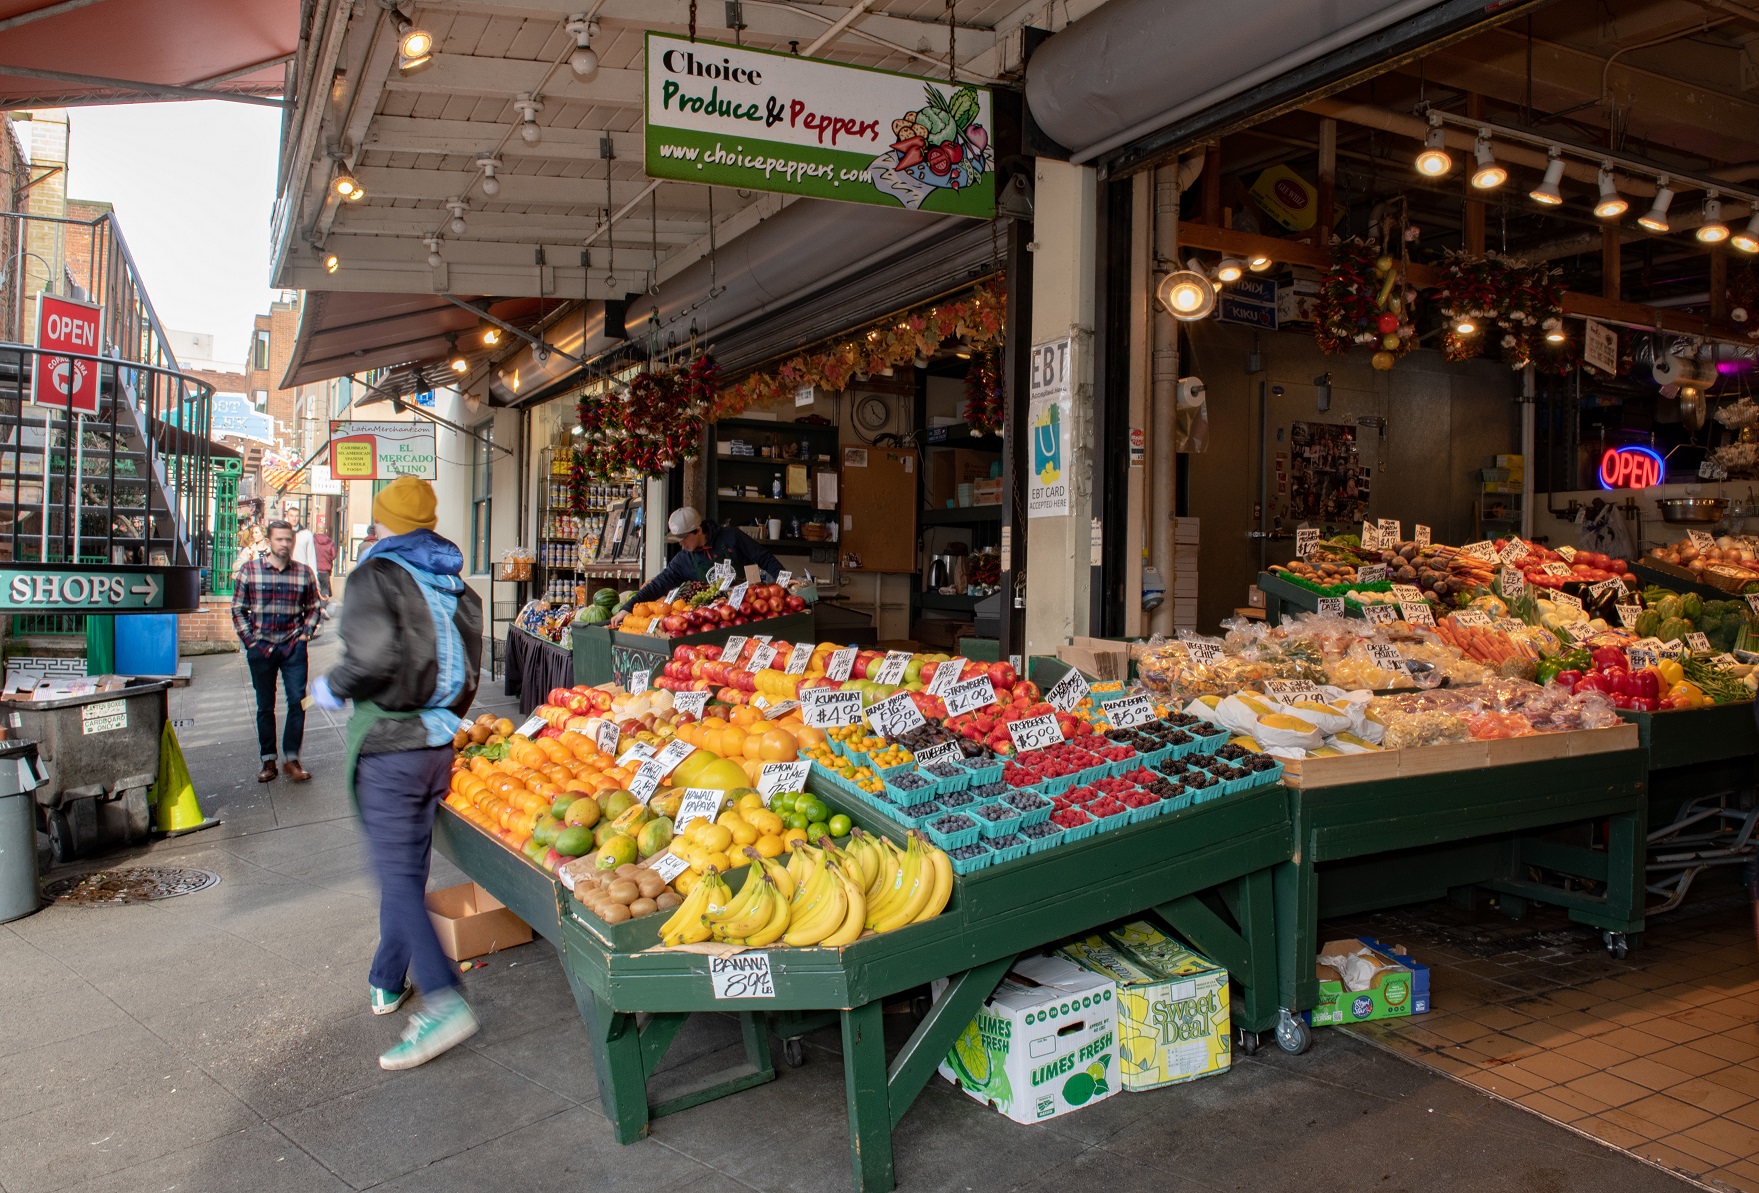 workers outside choice produce a produce stand in Pike Place Market